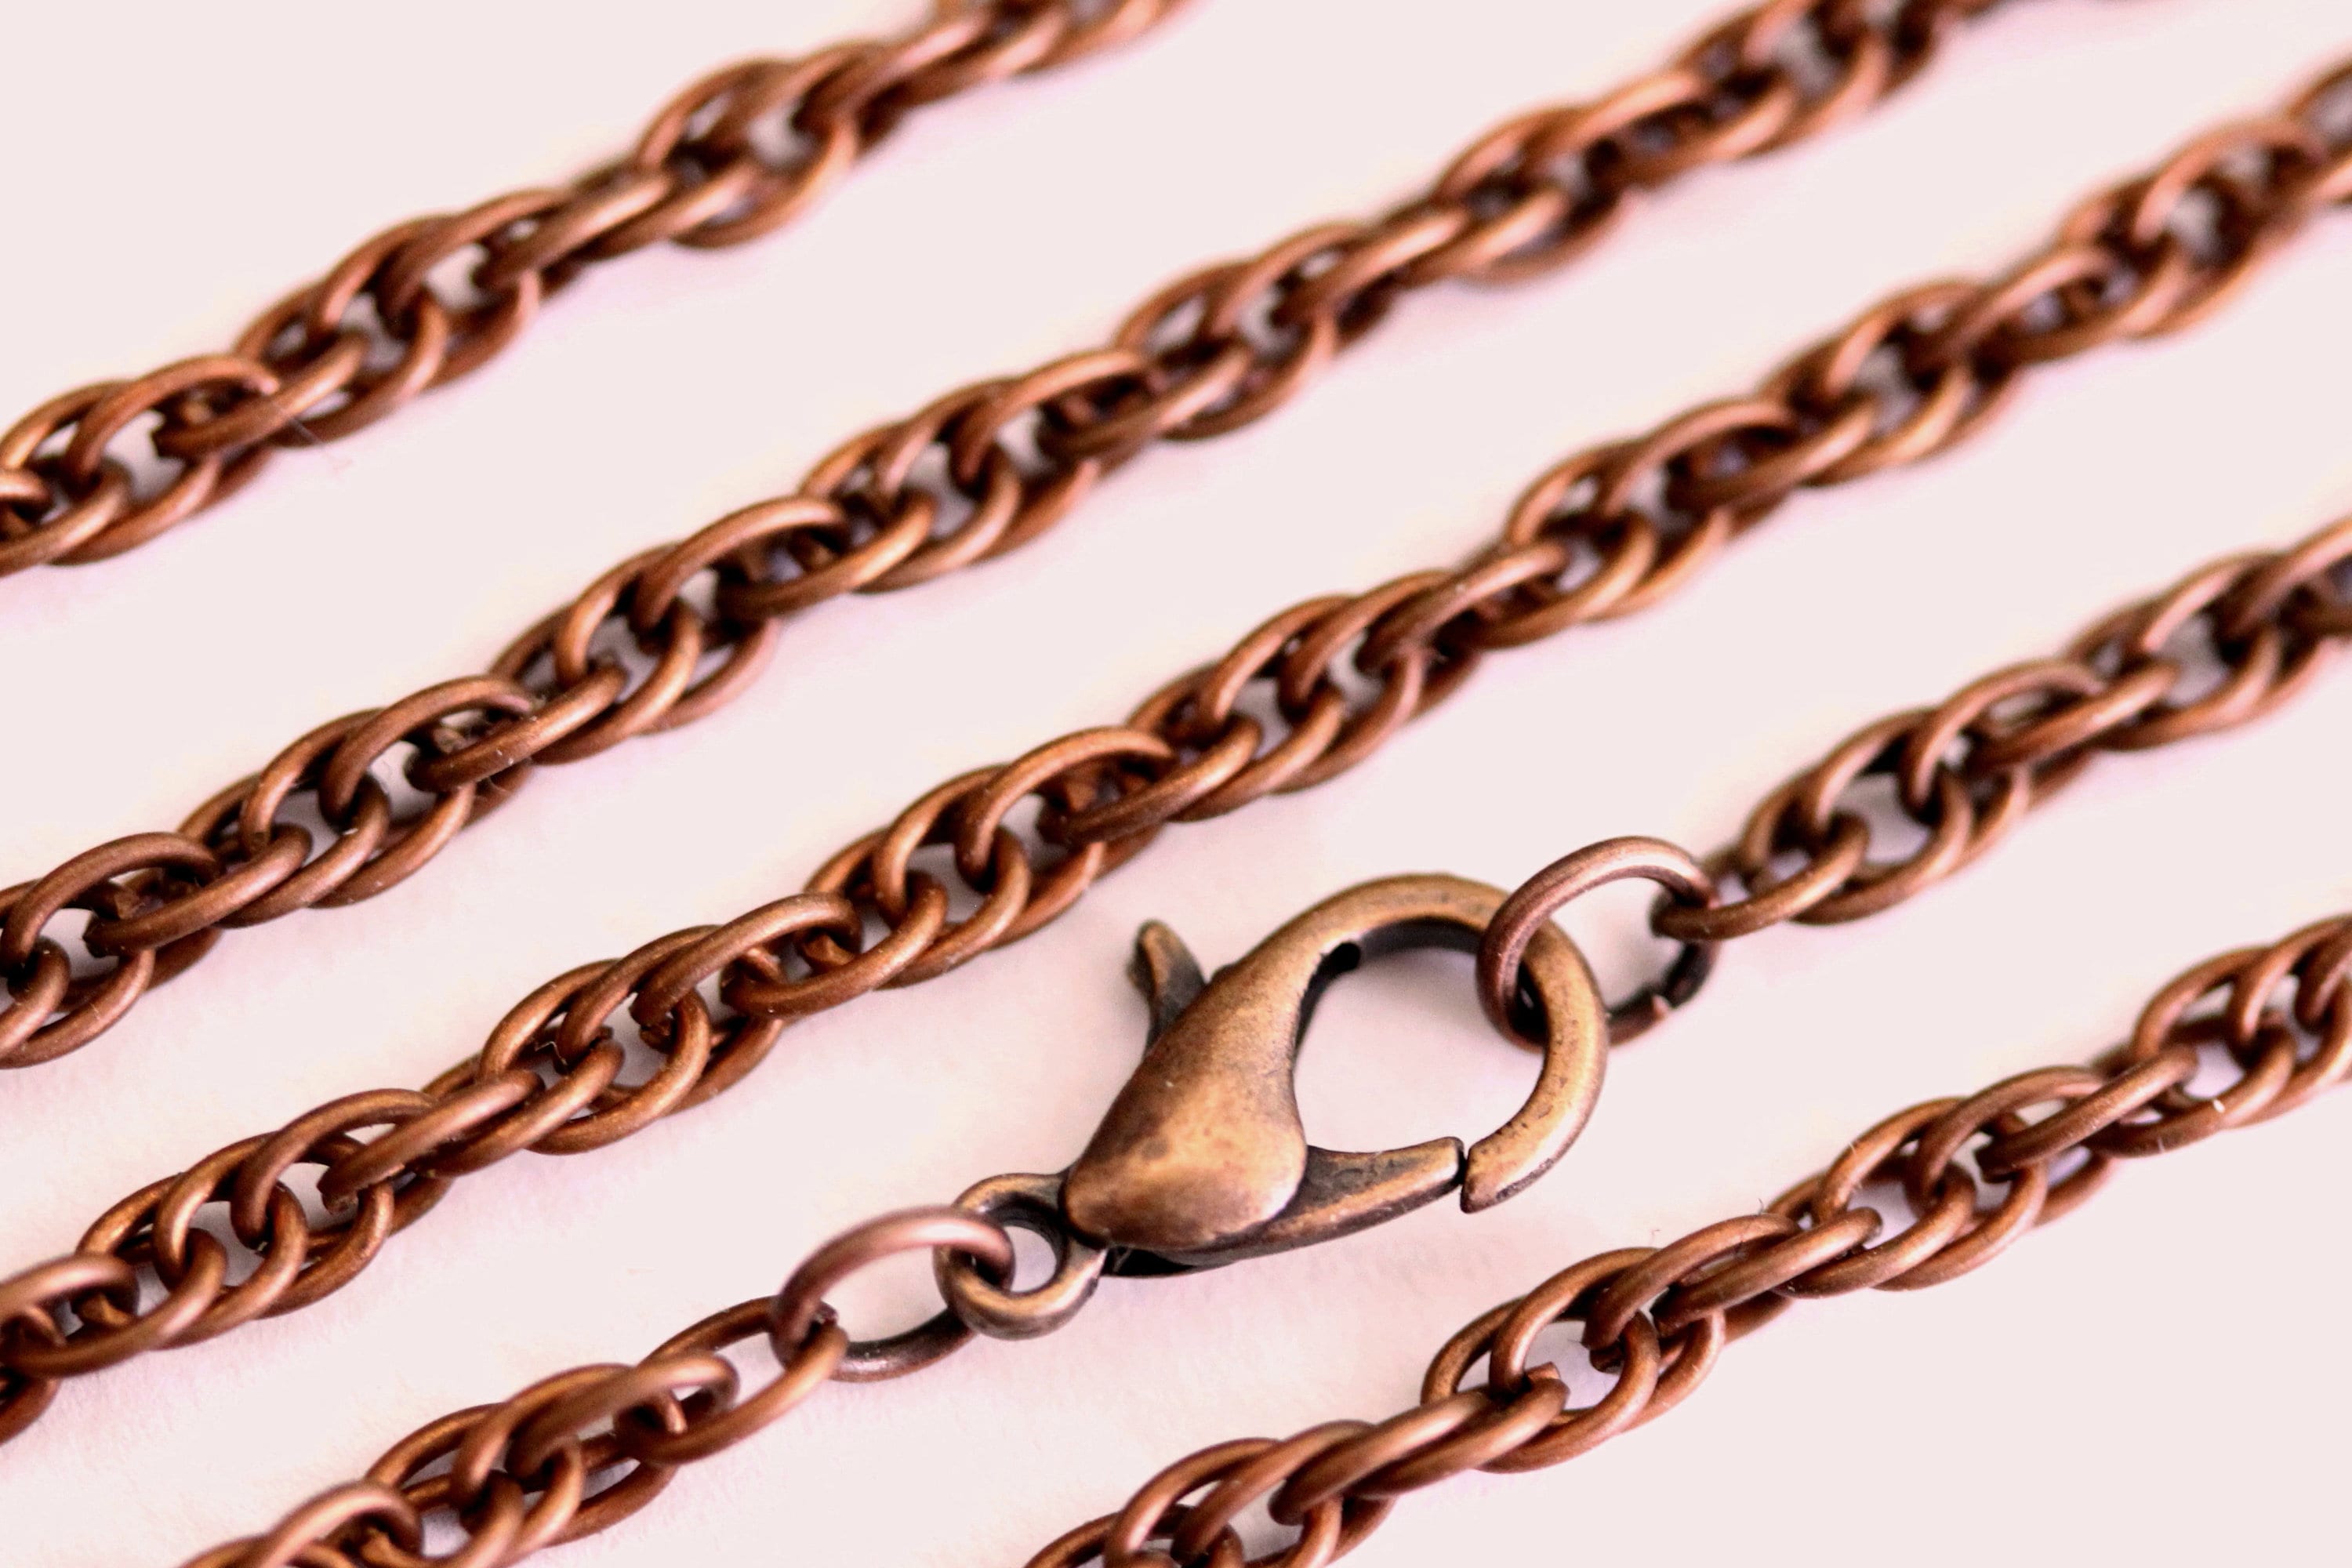 10/50 X Antique Copper Necklace for Women, 18 24 30 Inch Copper Chain  Necklace, Cable Link Oval Rolo Necklace Wholesale for Jewelry Making 